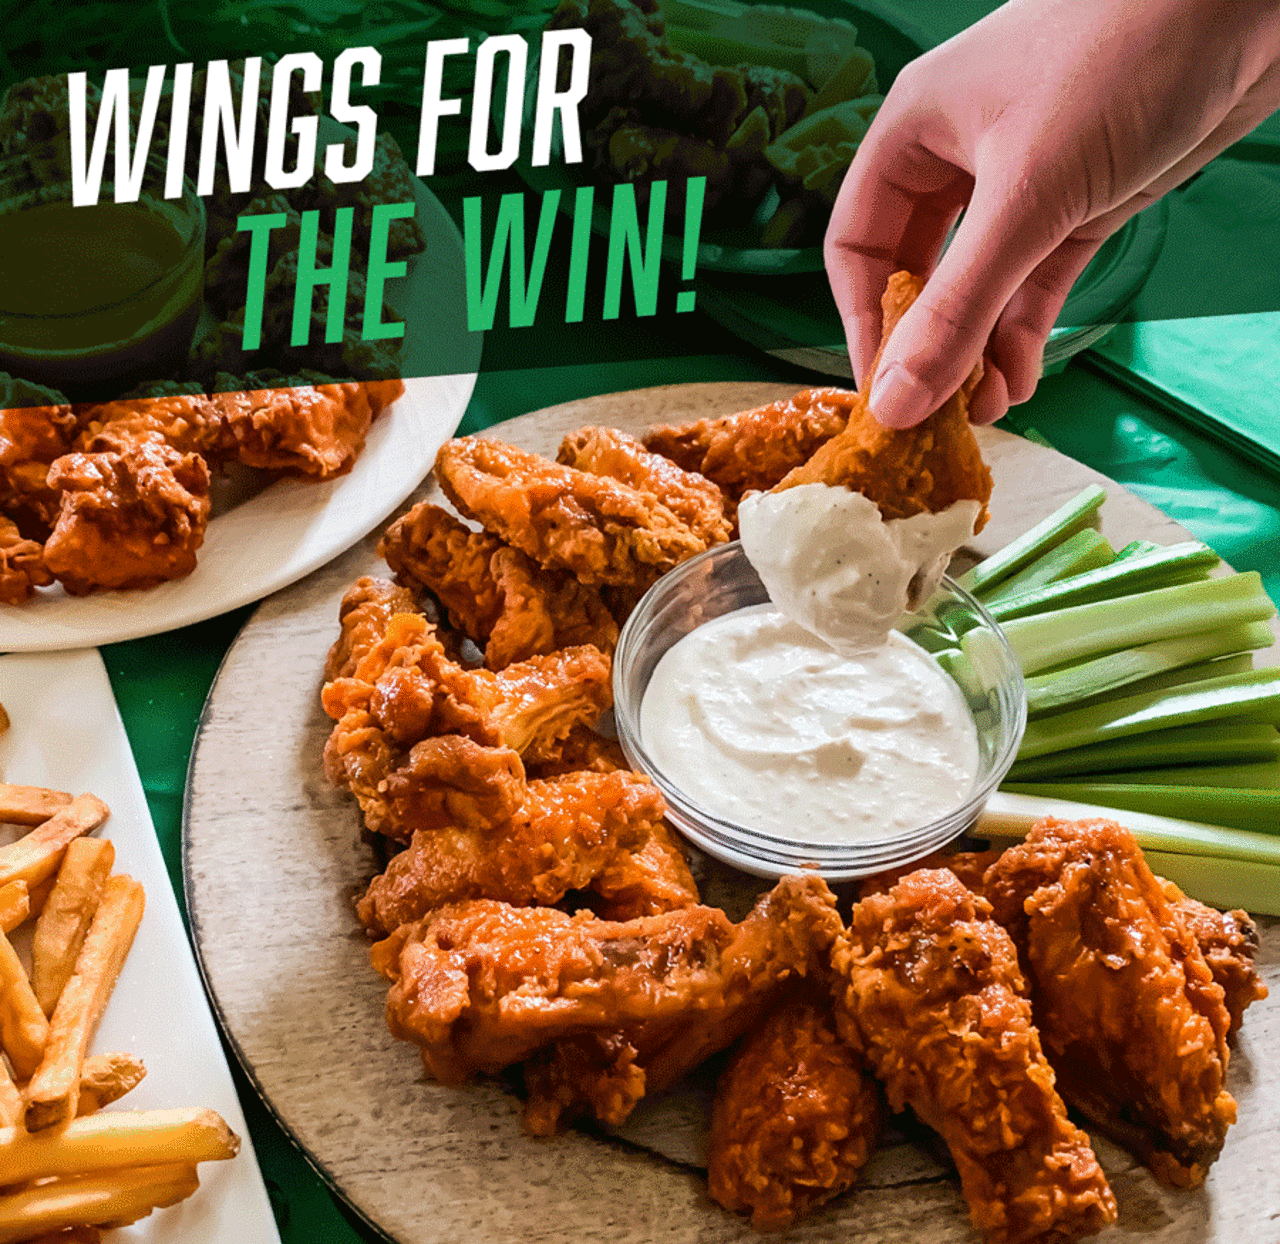 Wings for the Win!